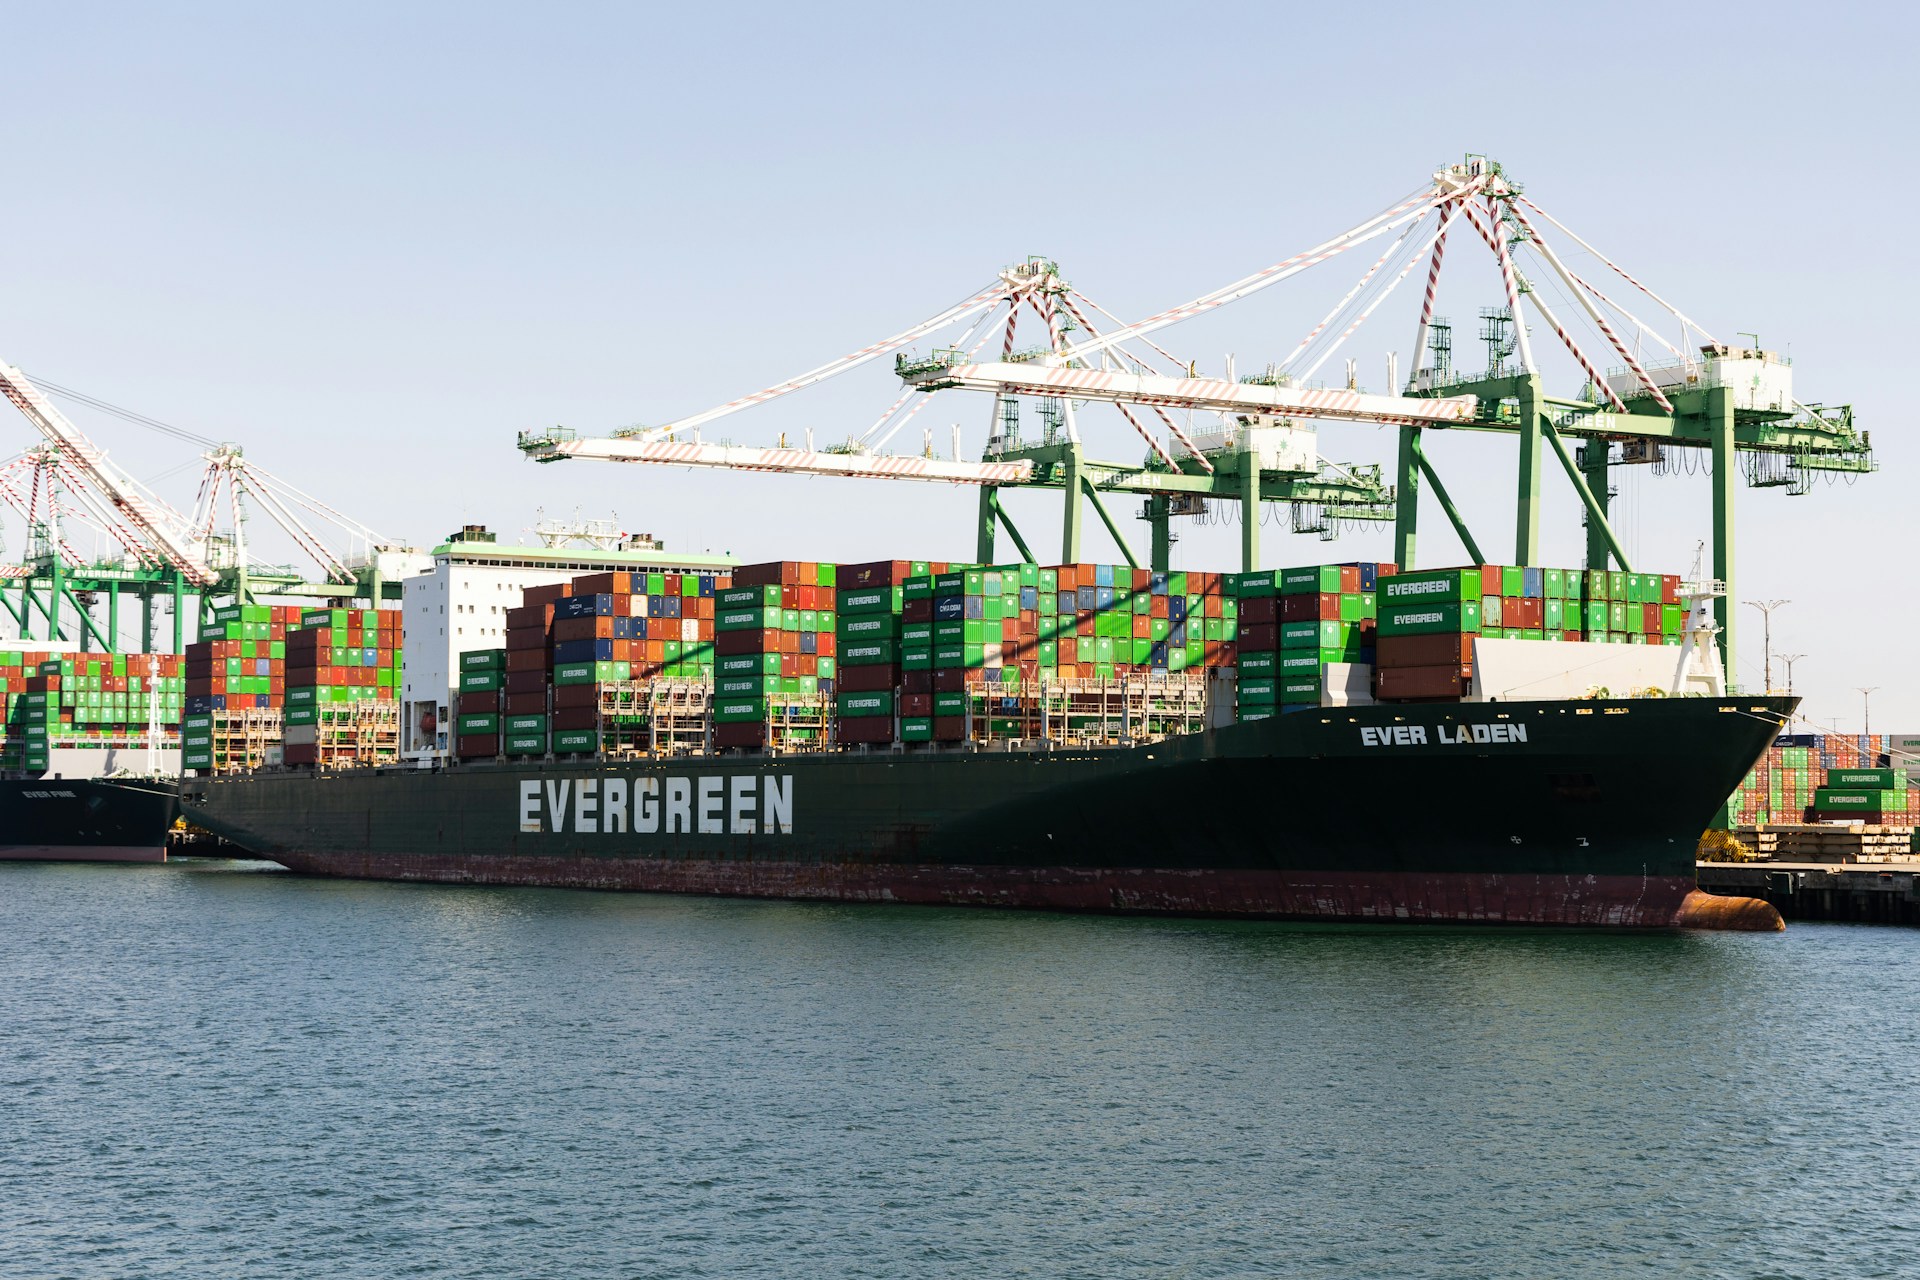 An Evergreen container ship